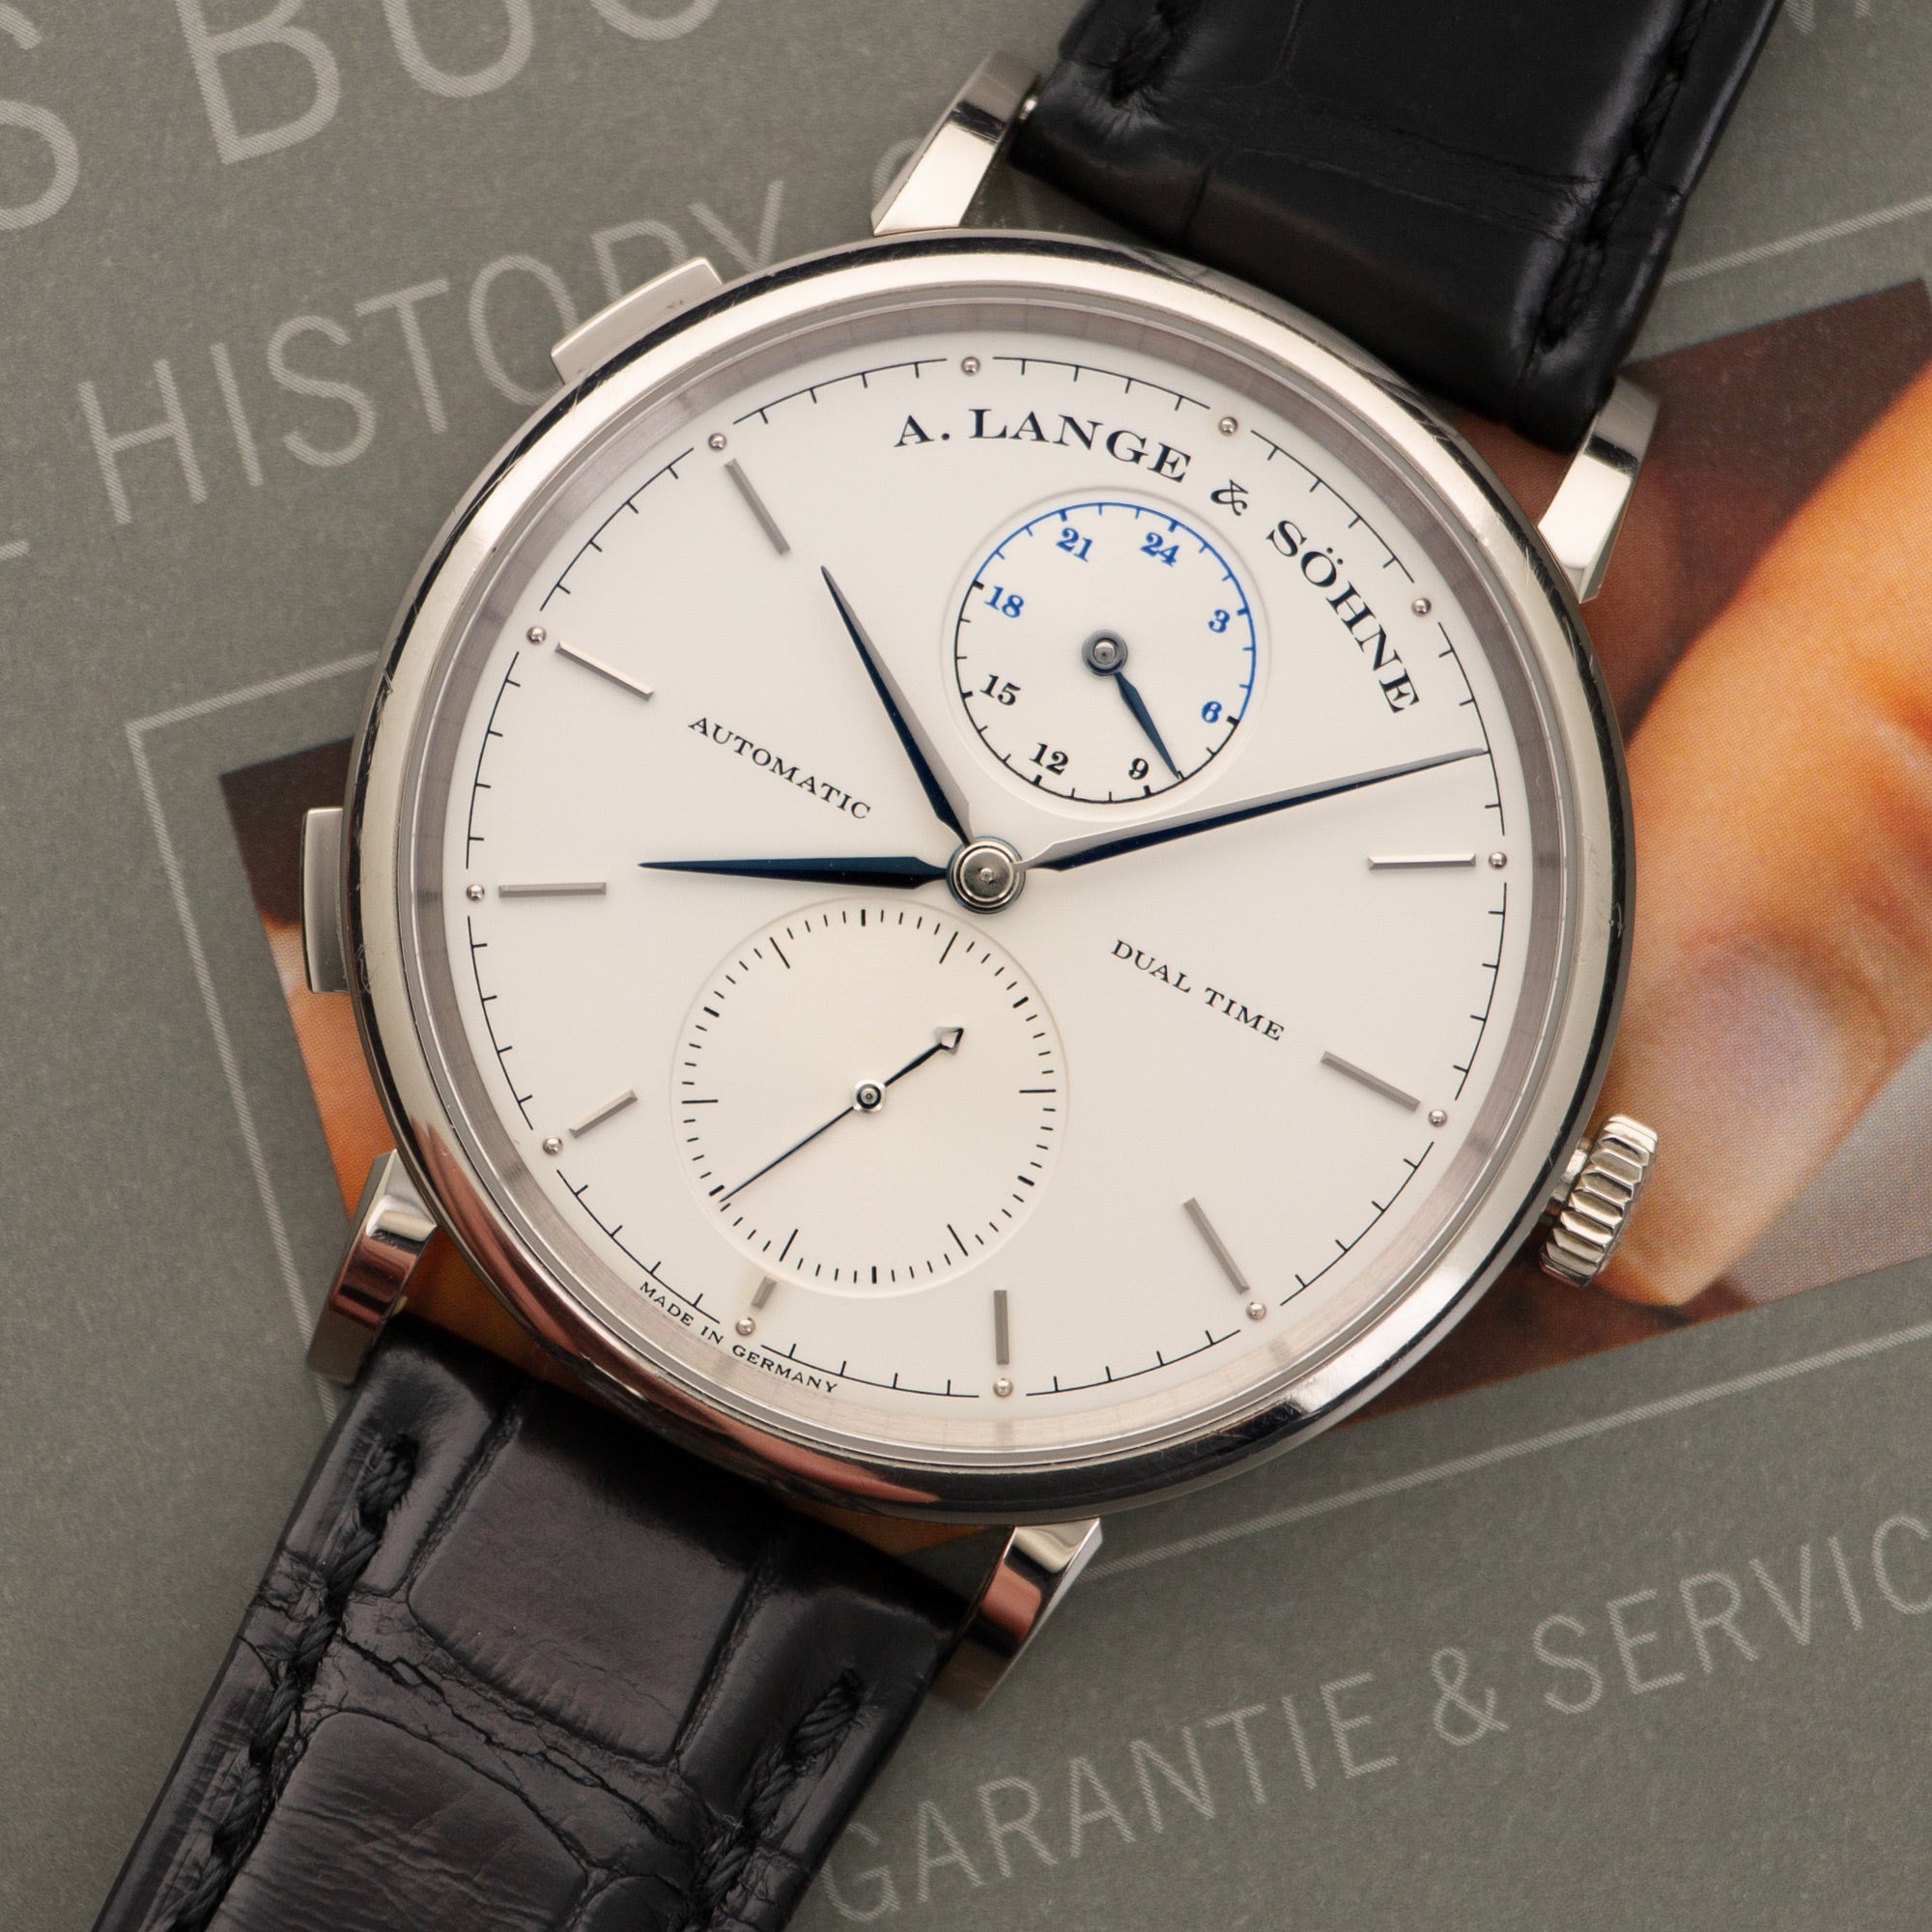 A. Lange & Sohne - A. Lange & Sohne White Gold Saxonia Dual Time Watch Ref. 385.026 - The Keystone Watches